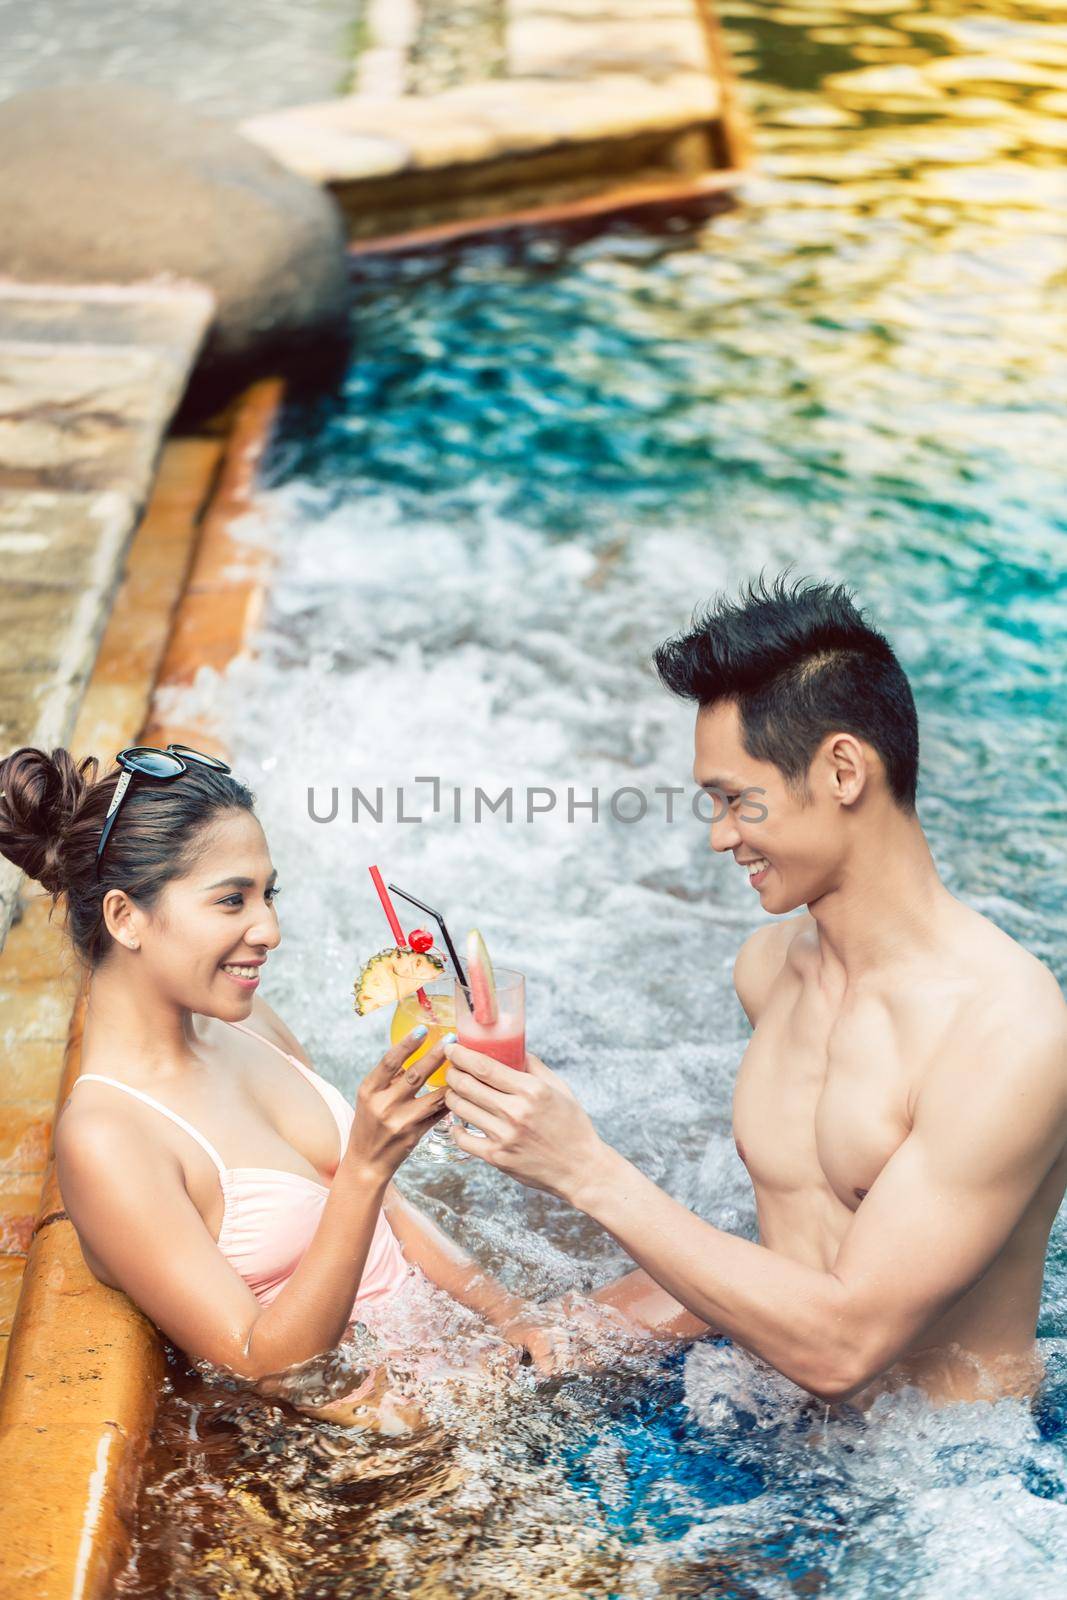 Young man flirting with an attractive woman in a trendy swimming pool by Kzenon